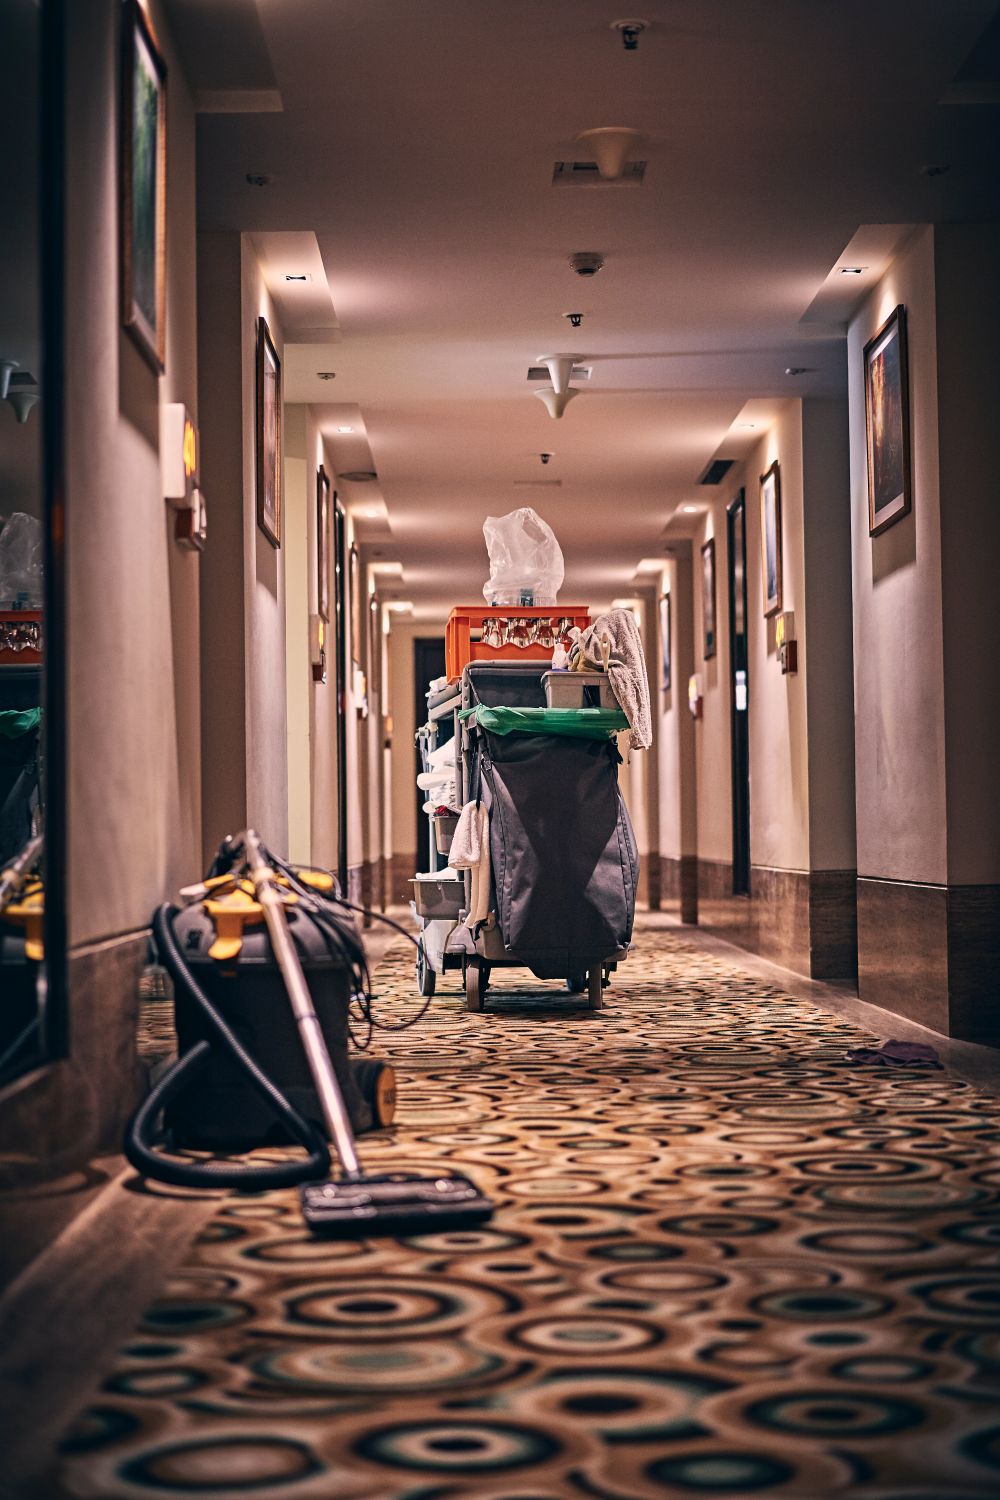 Hotel cleaning supplies insured with cleaning business insurance